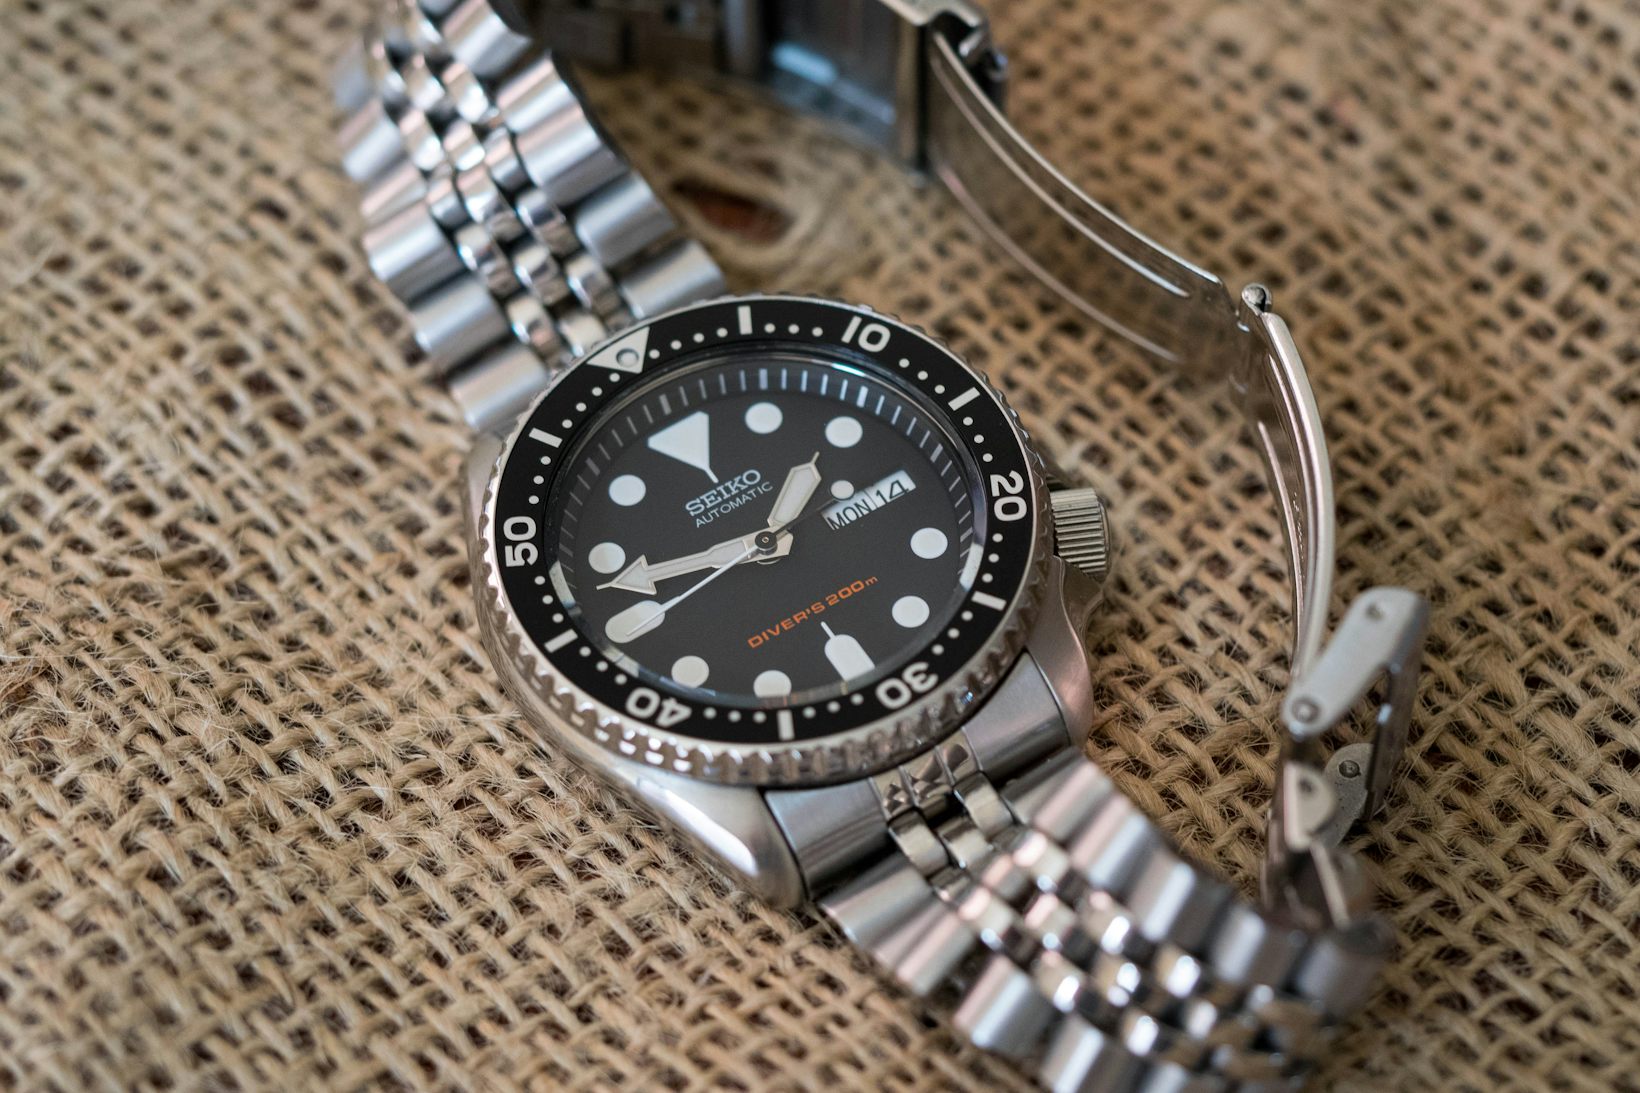 The SKX007 King of value-packed dive watches